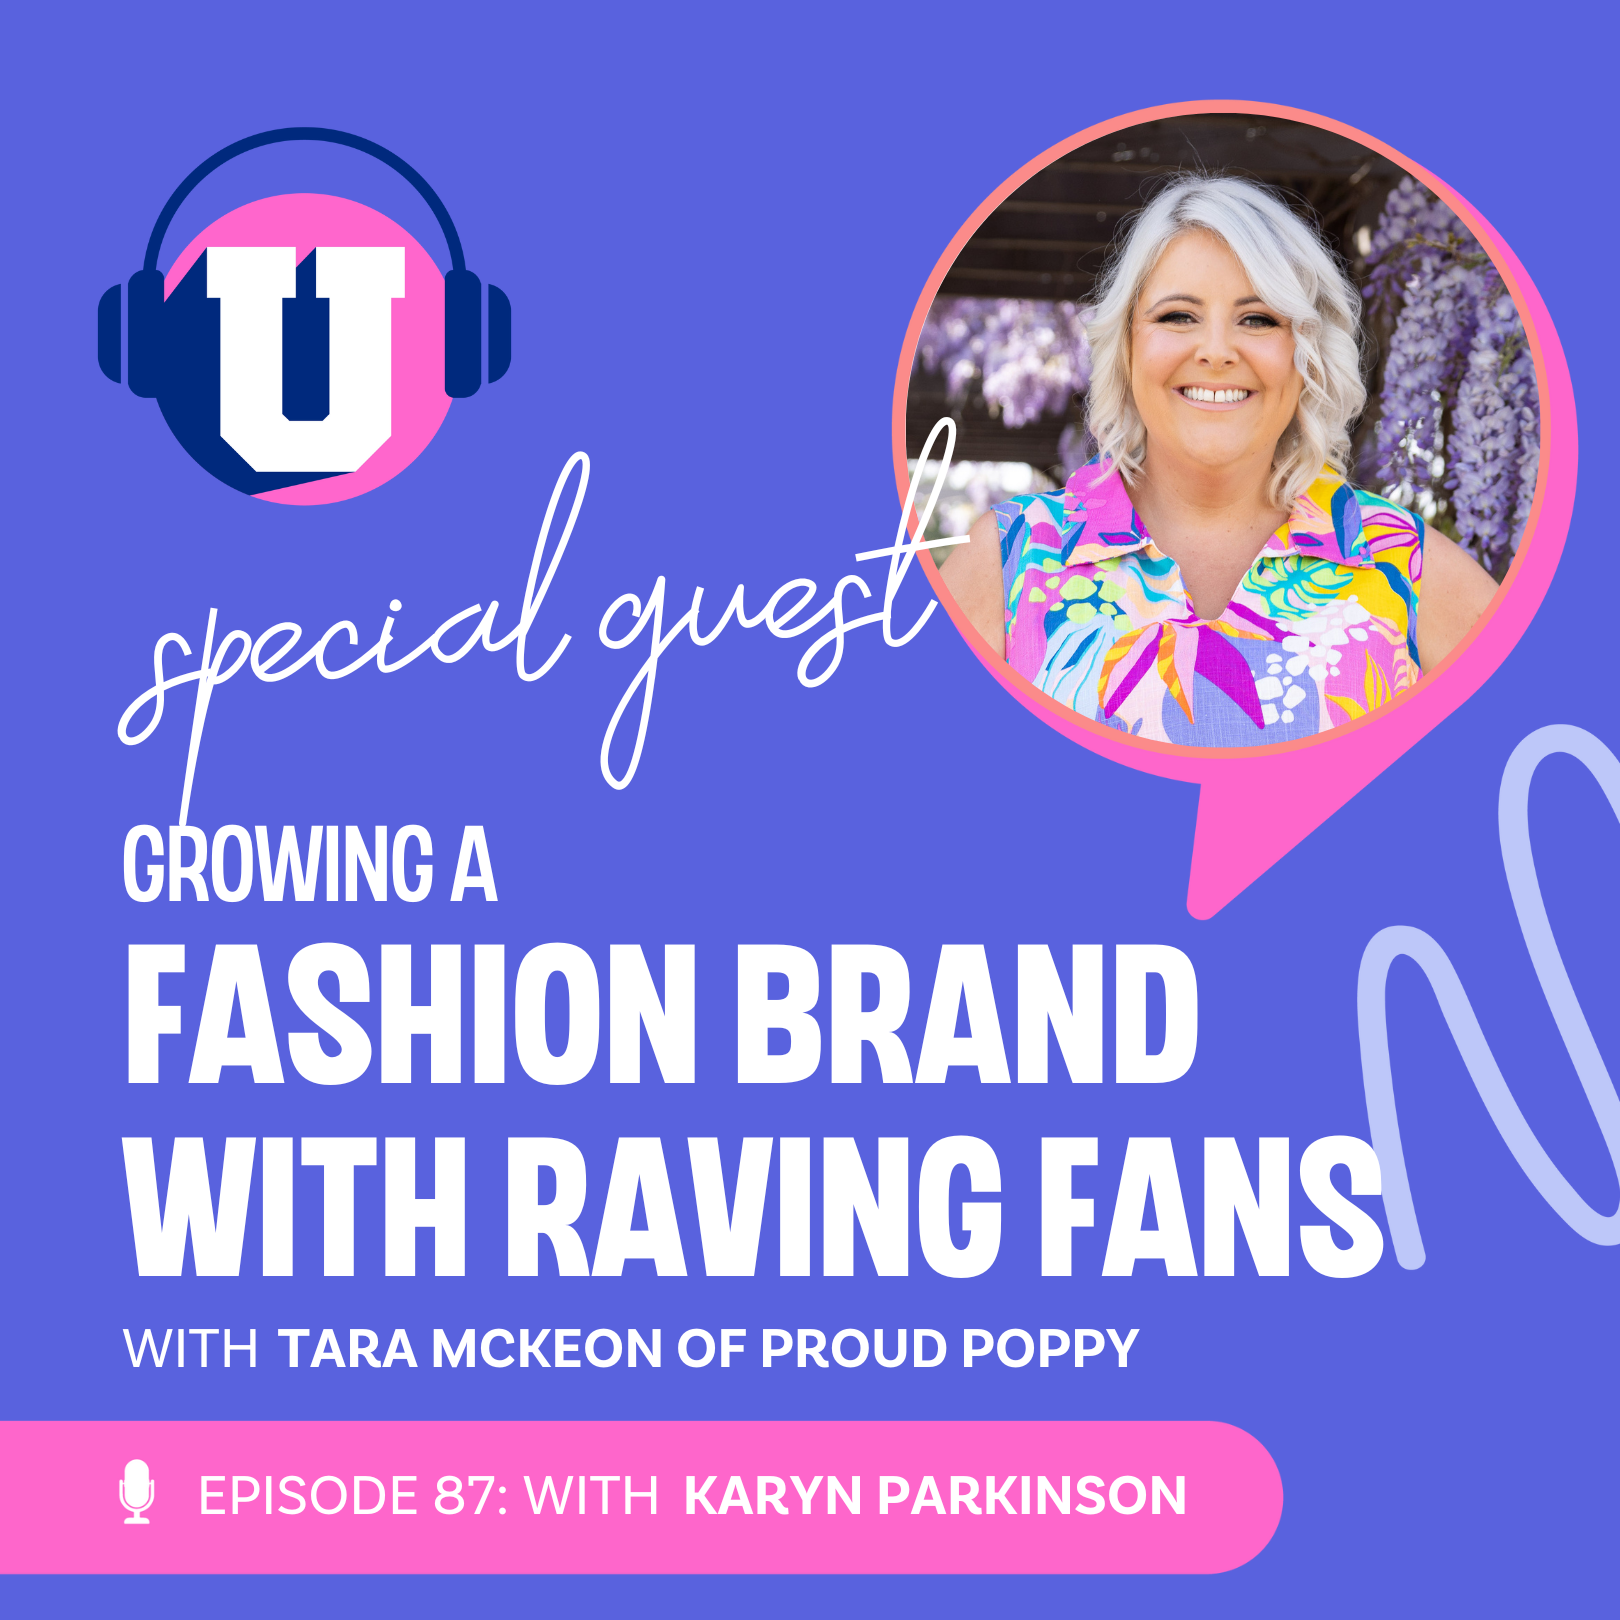 Growing a Fashion Brand with Raving Fans with Tara McKeon of Proud Poppy